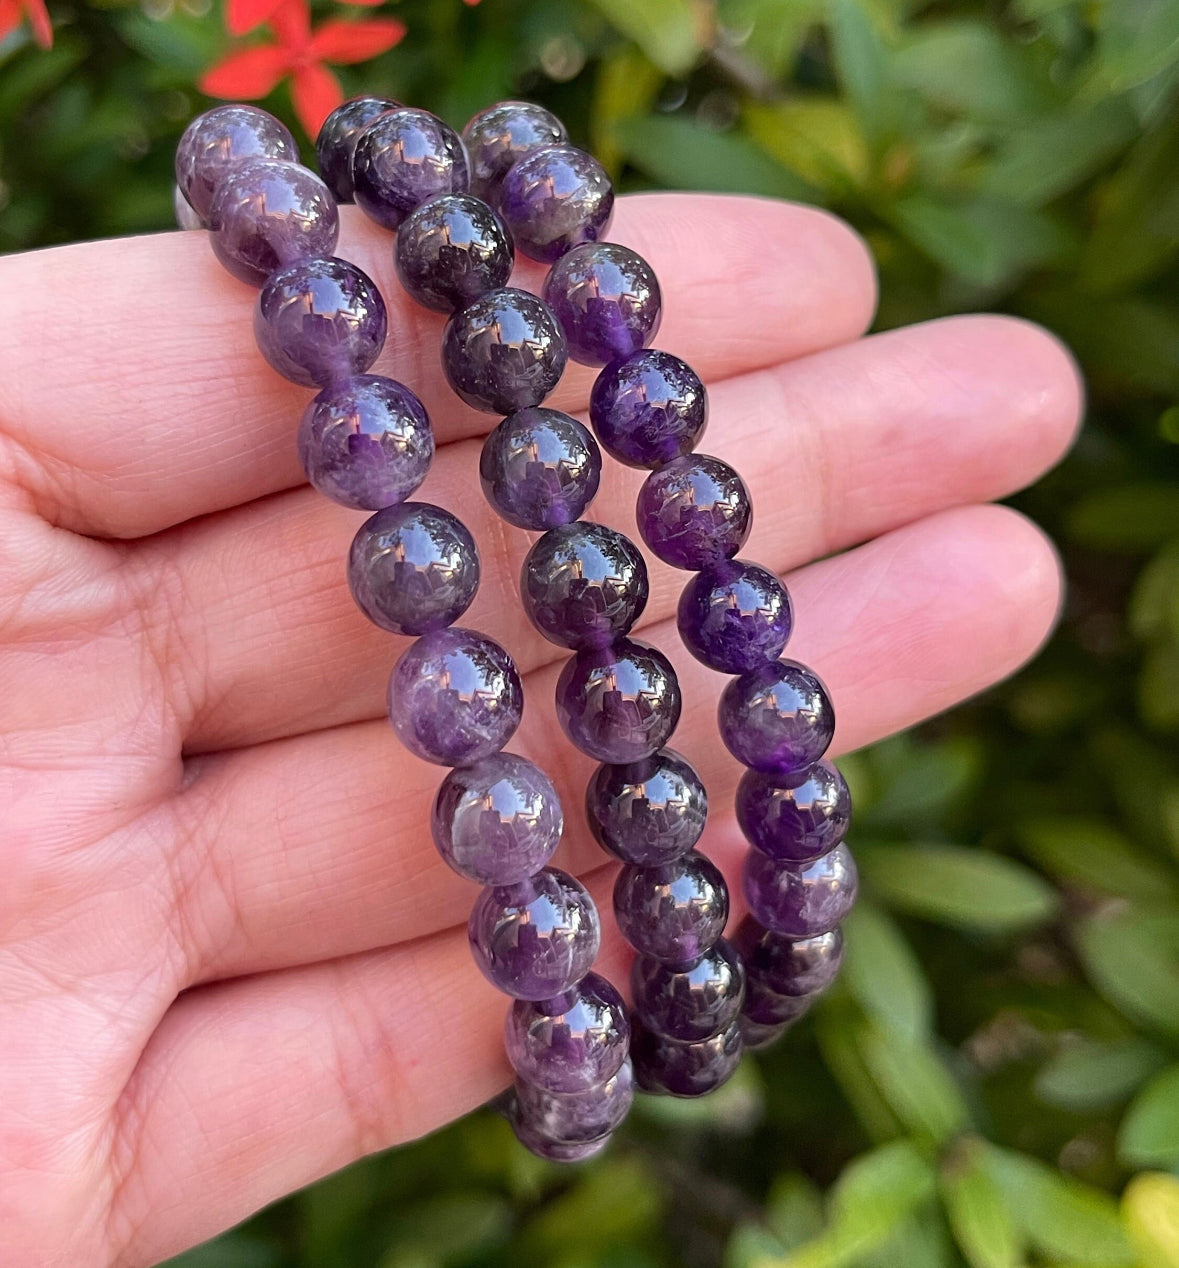 Amethyst Bracelet (AAA quality) - Alignment with Higher Self